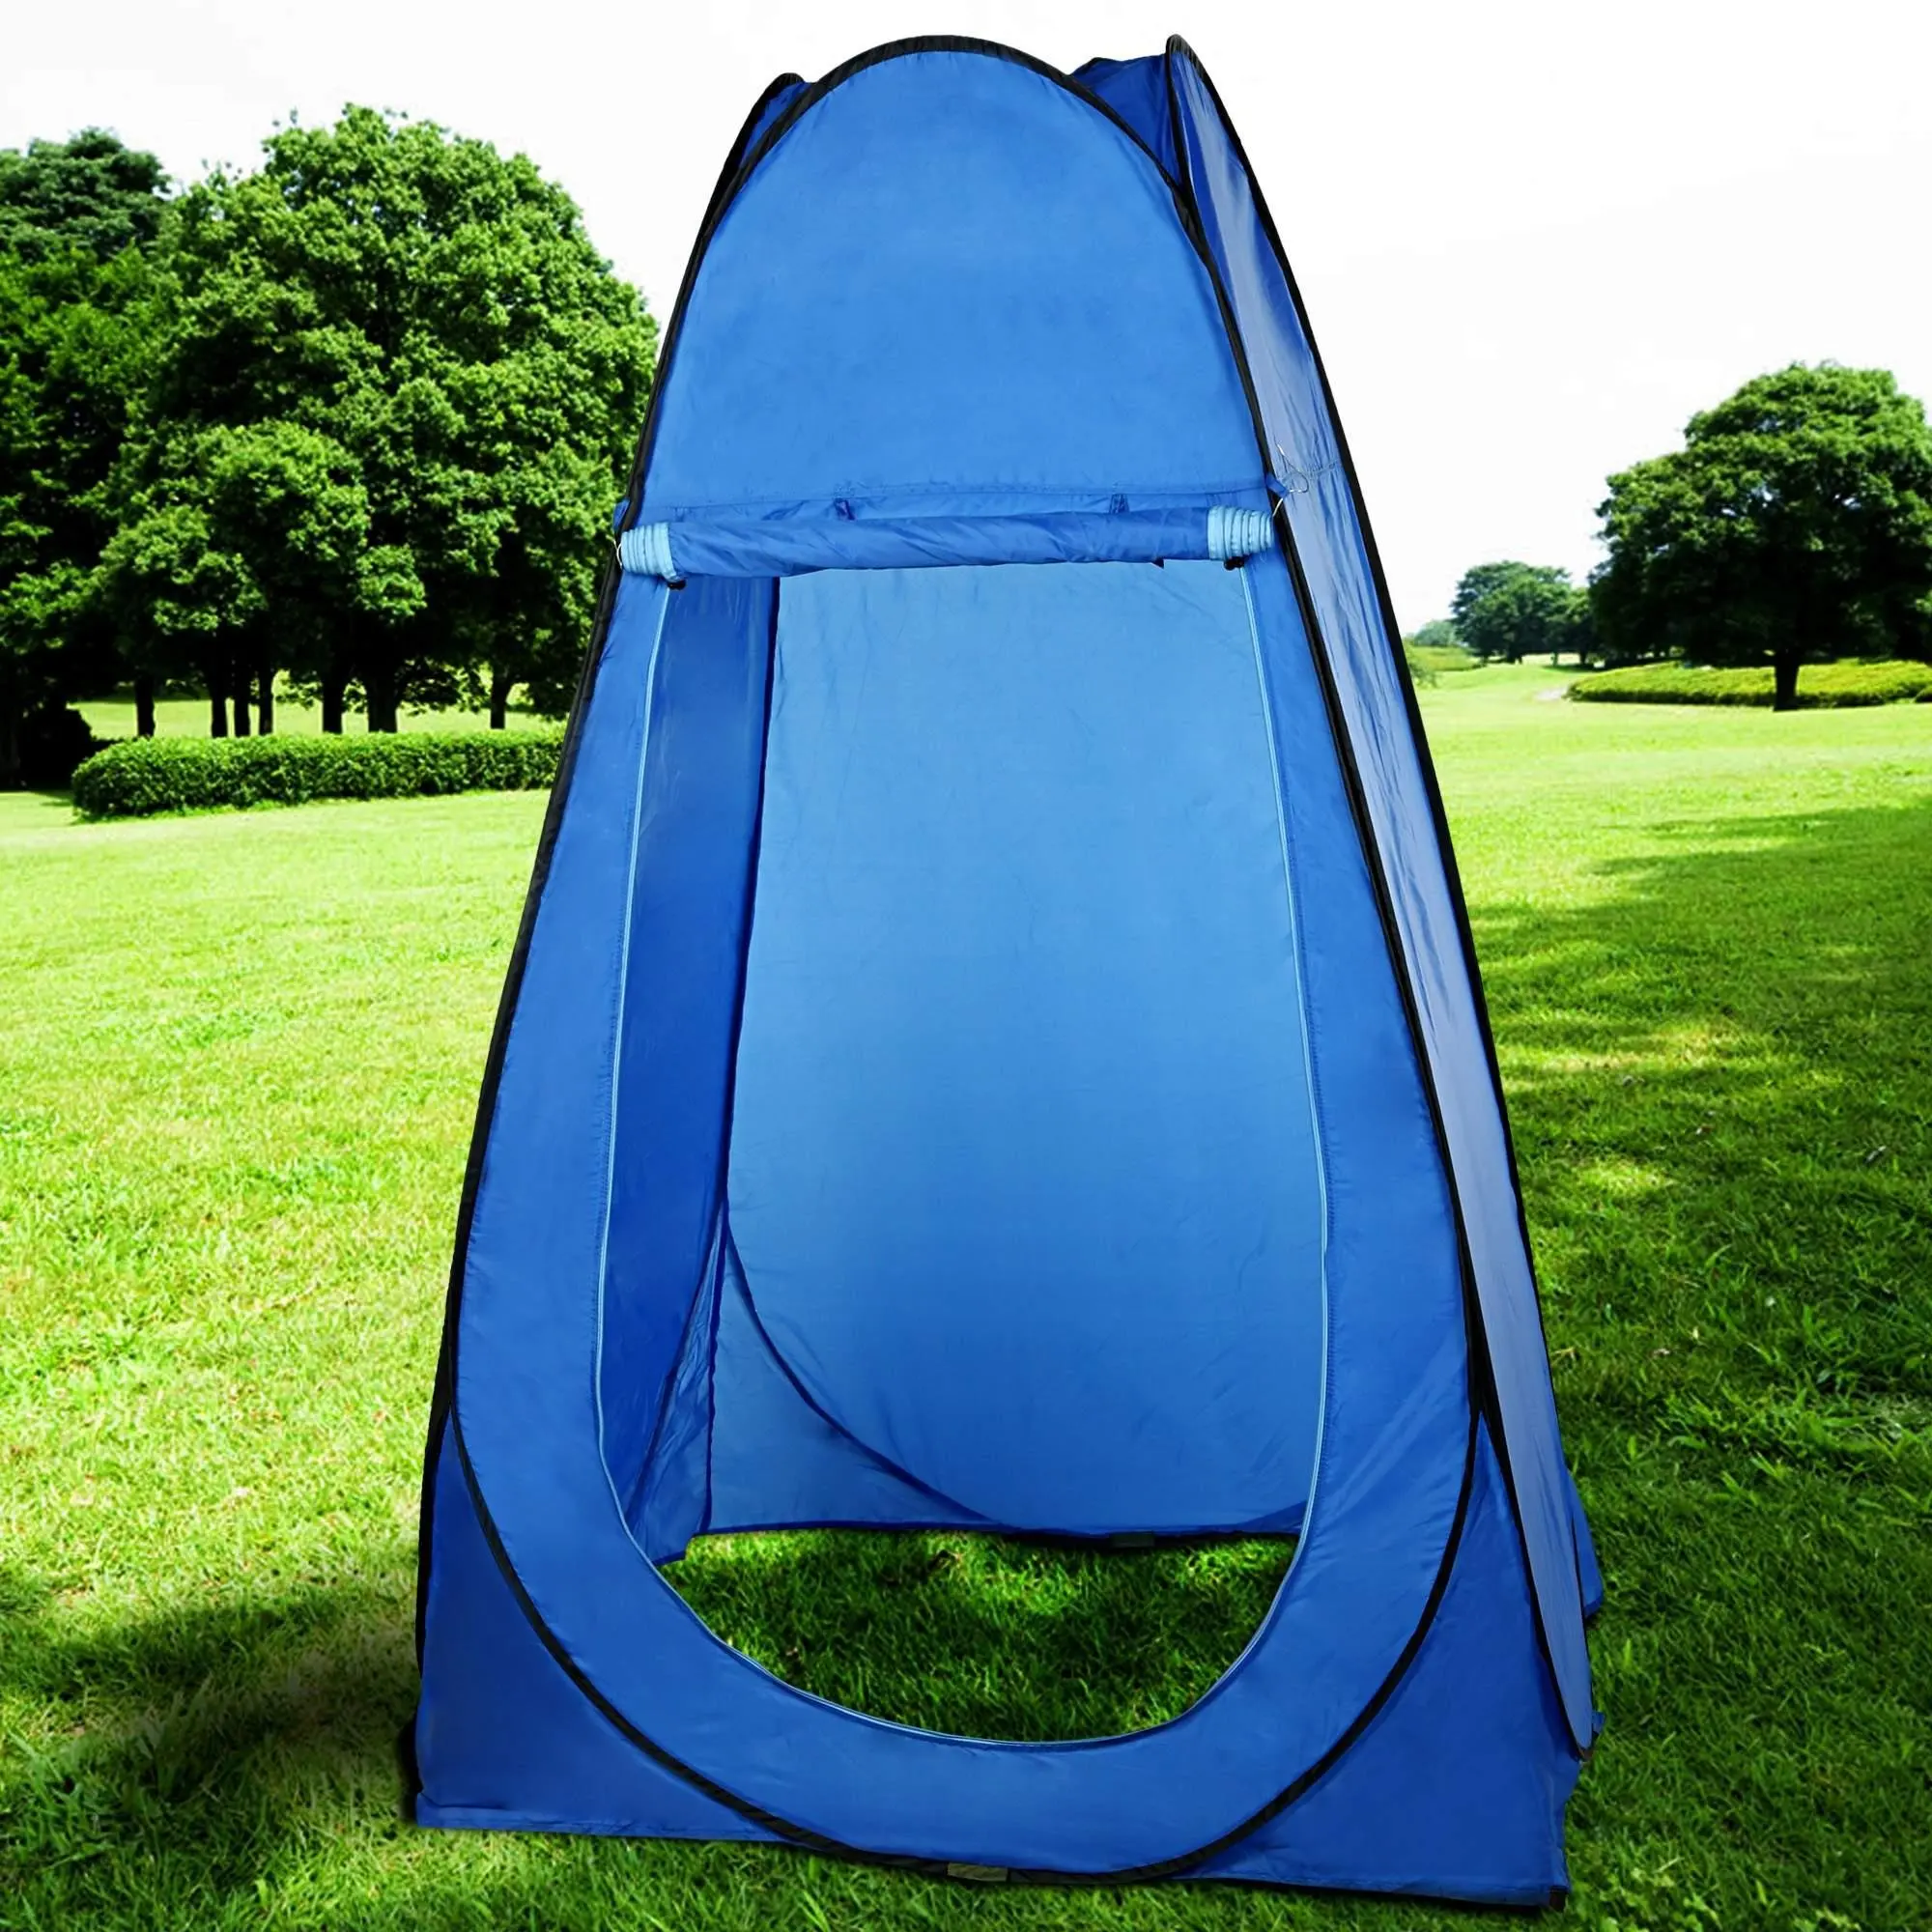 Buy Portable Pop-Up Tent, Outdoor Waterproof Changing Room Shower Toilet Camping Beach Tent with 